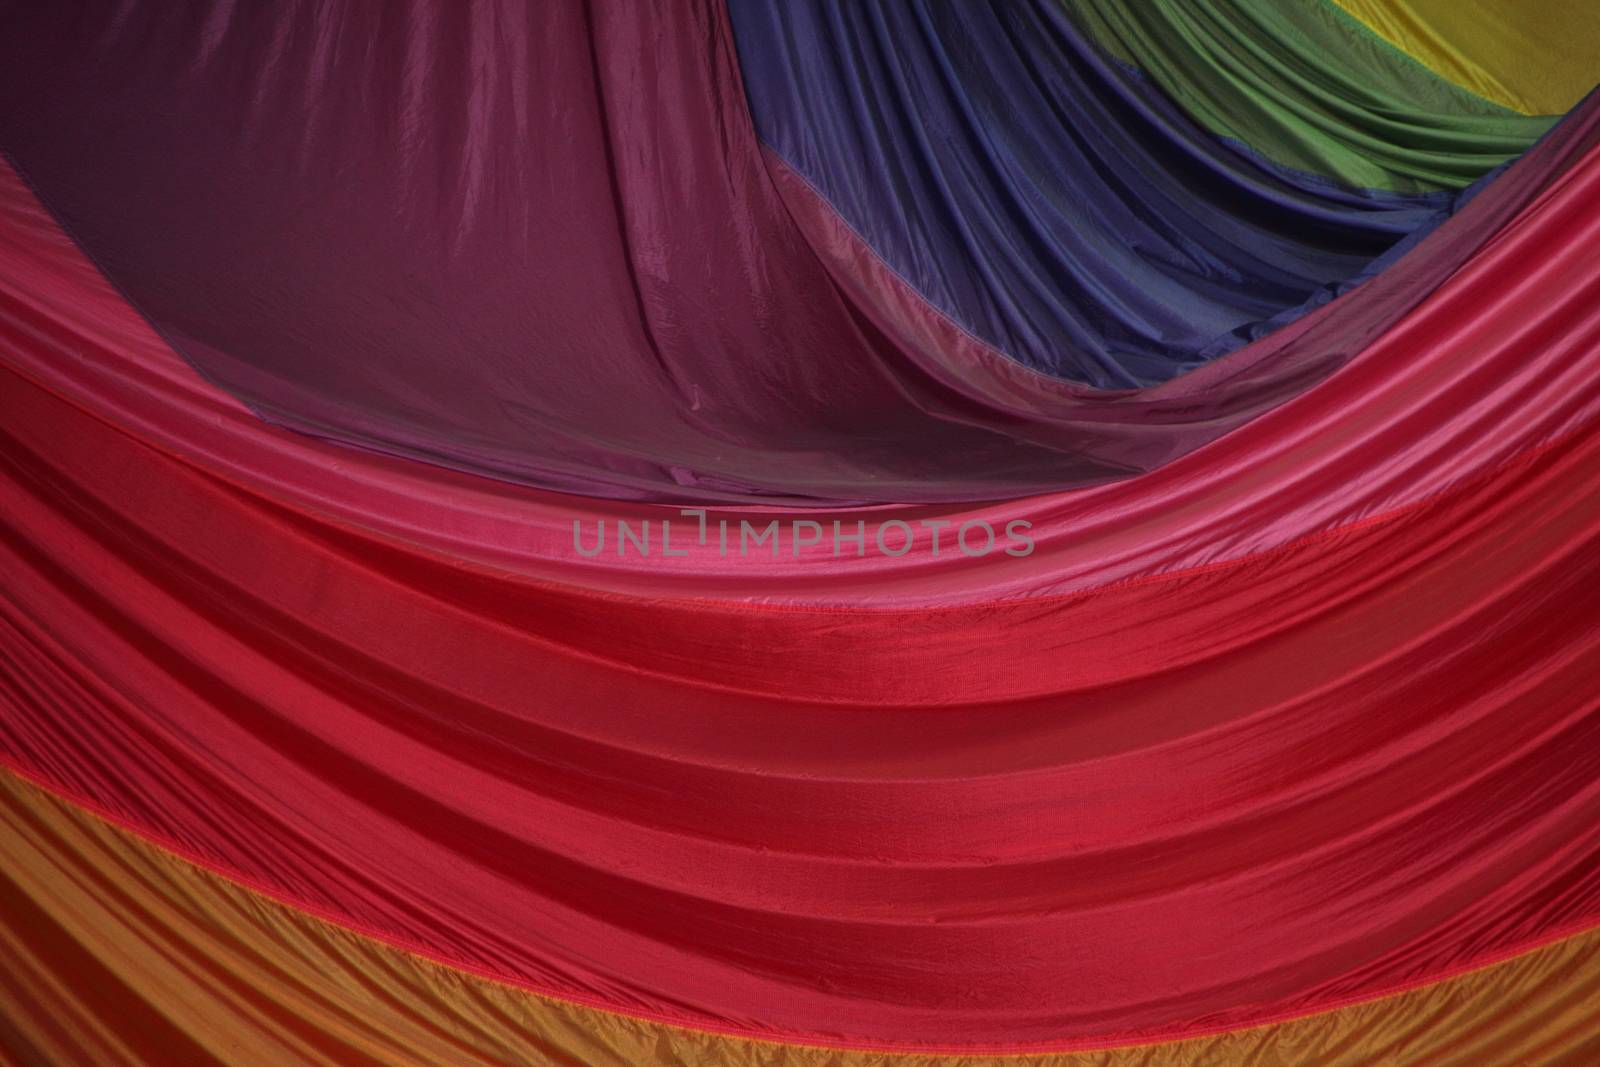 Segment of Folded Parachute Fabric in Beautiful Colors by HoleInTheBox